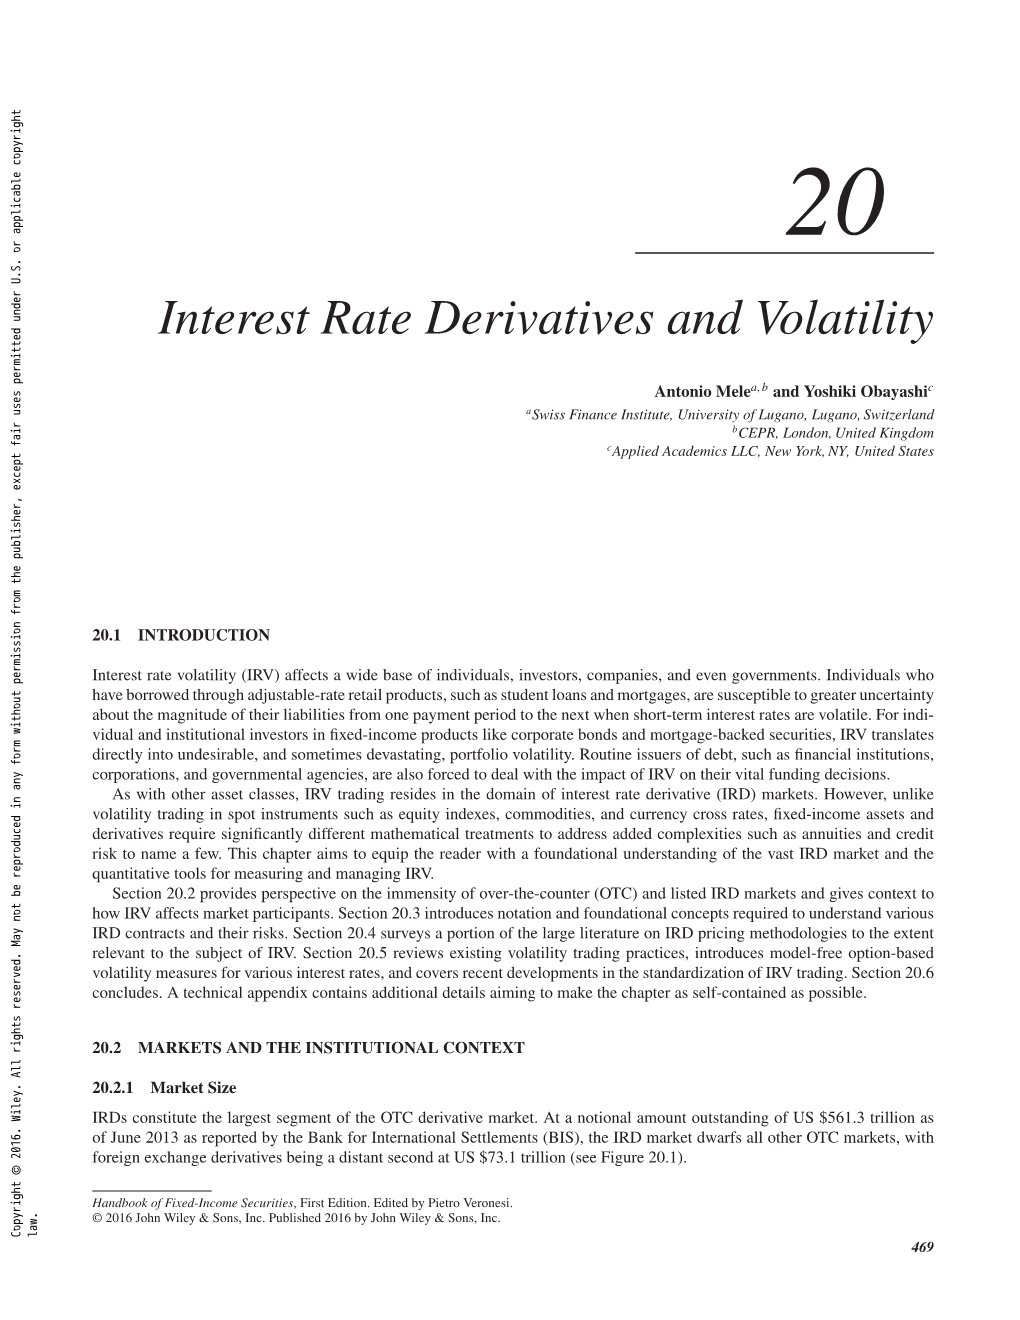 Interest Rate Derivatives and Volatility